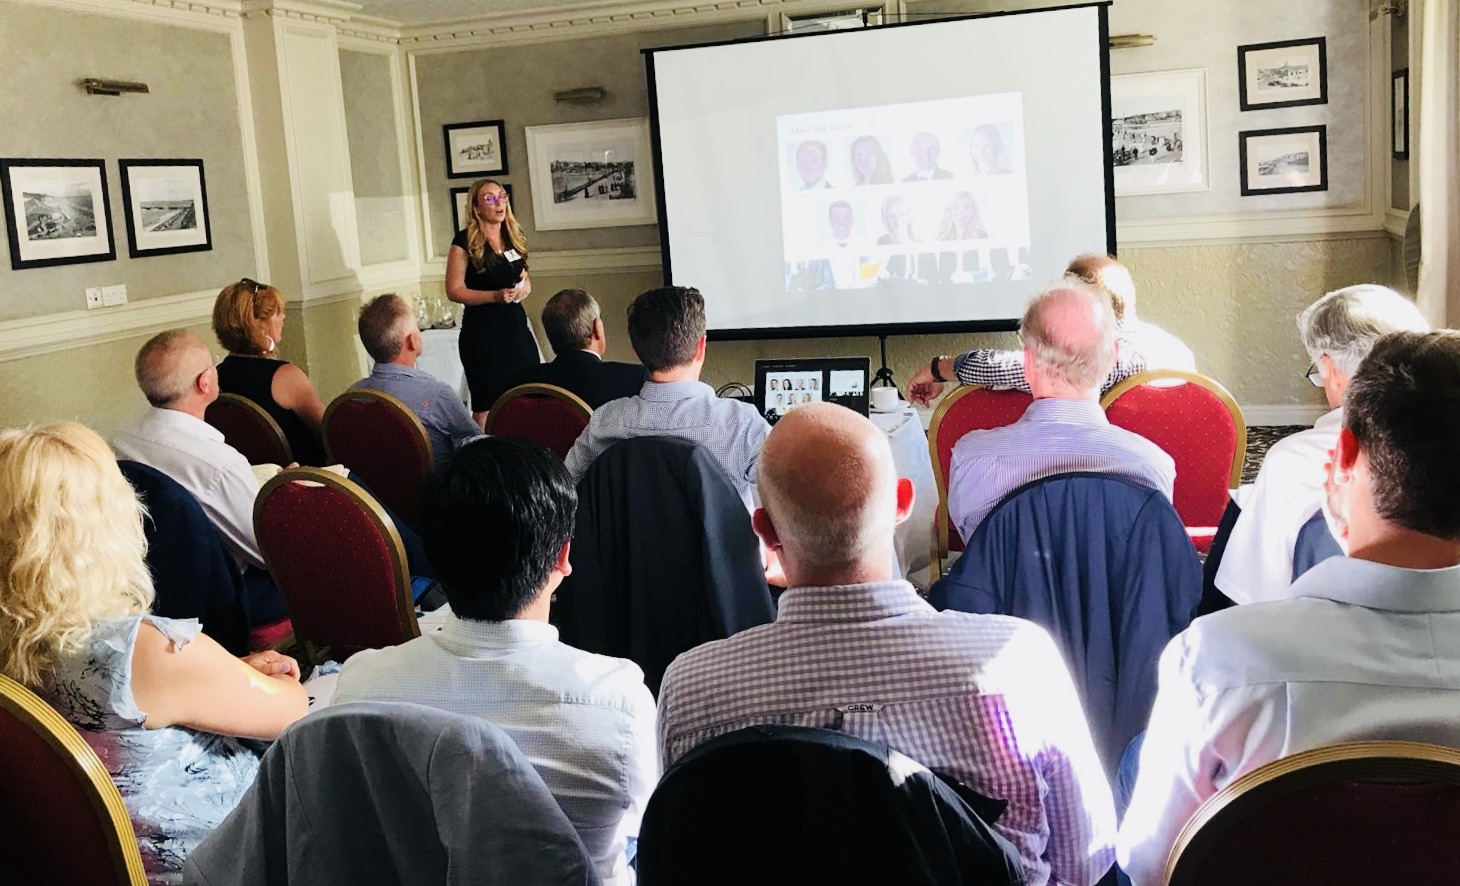 Technology companies impress Dorset Business Angels investors at pitch event